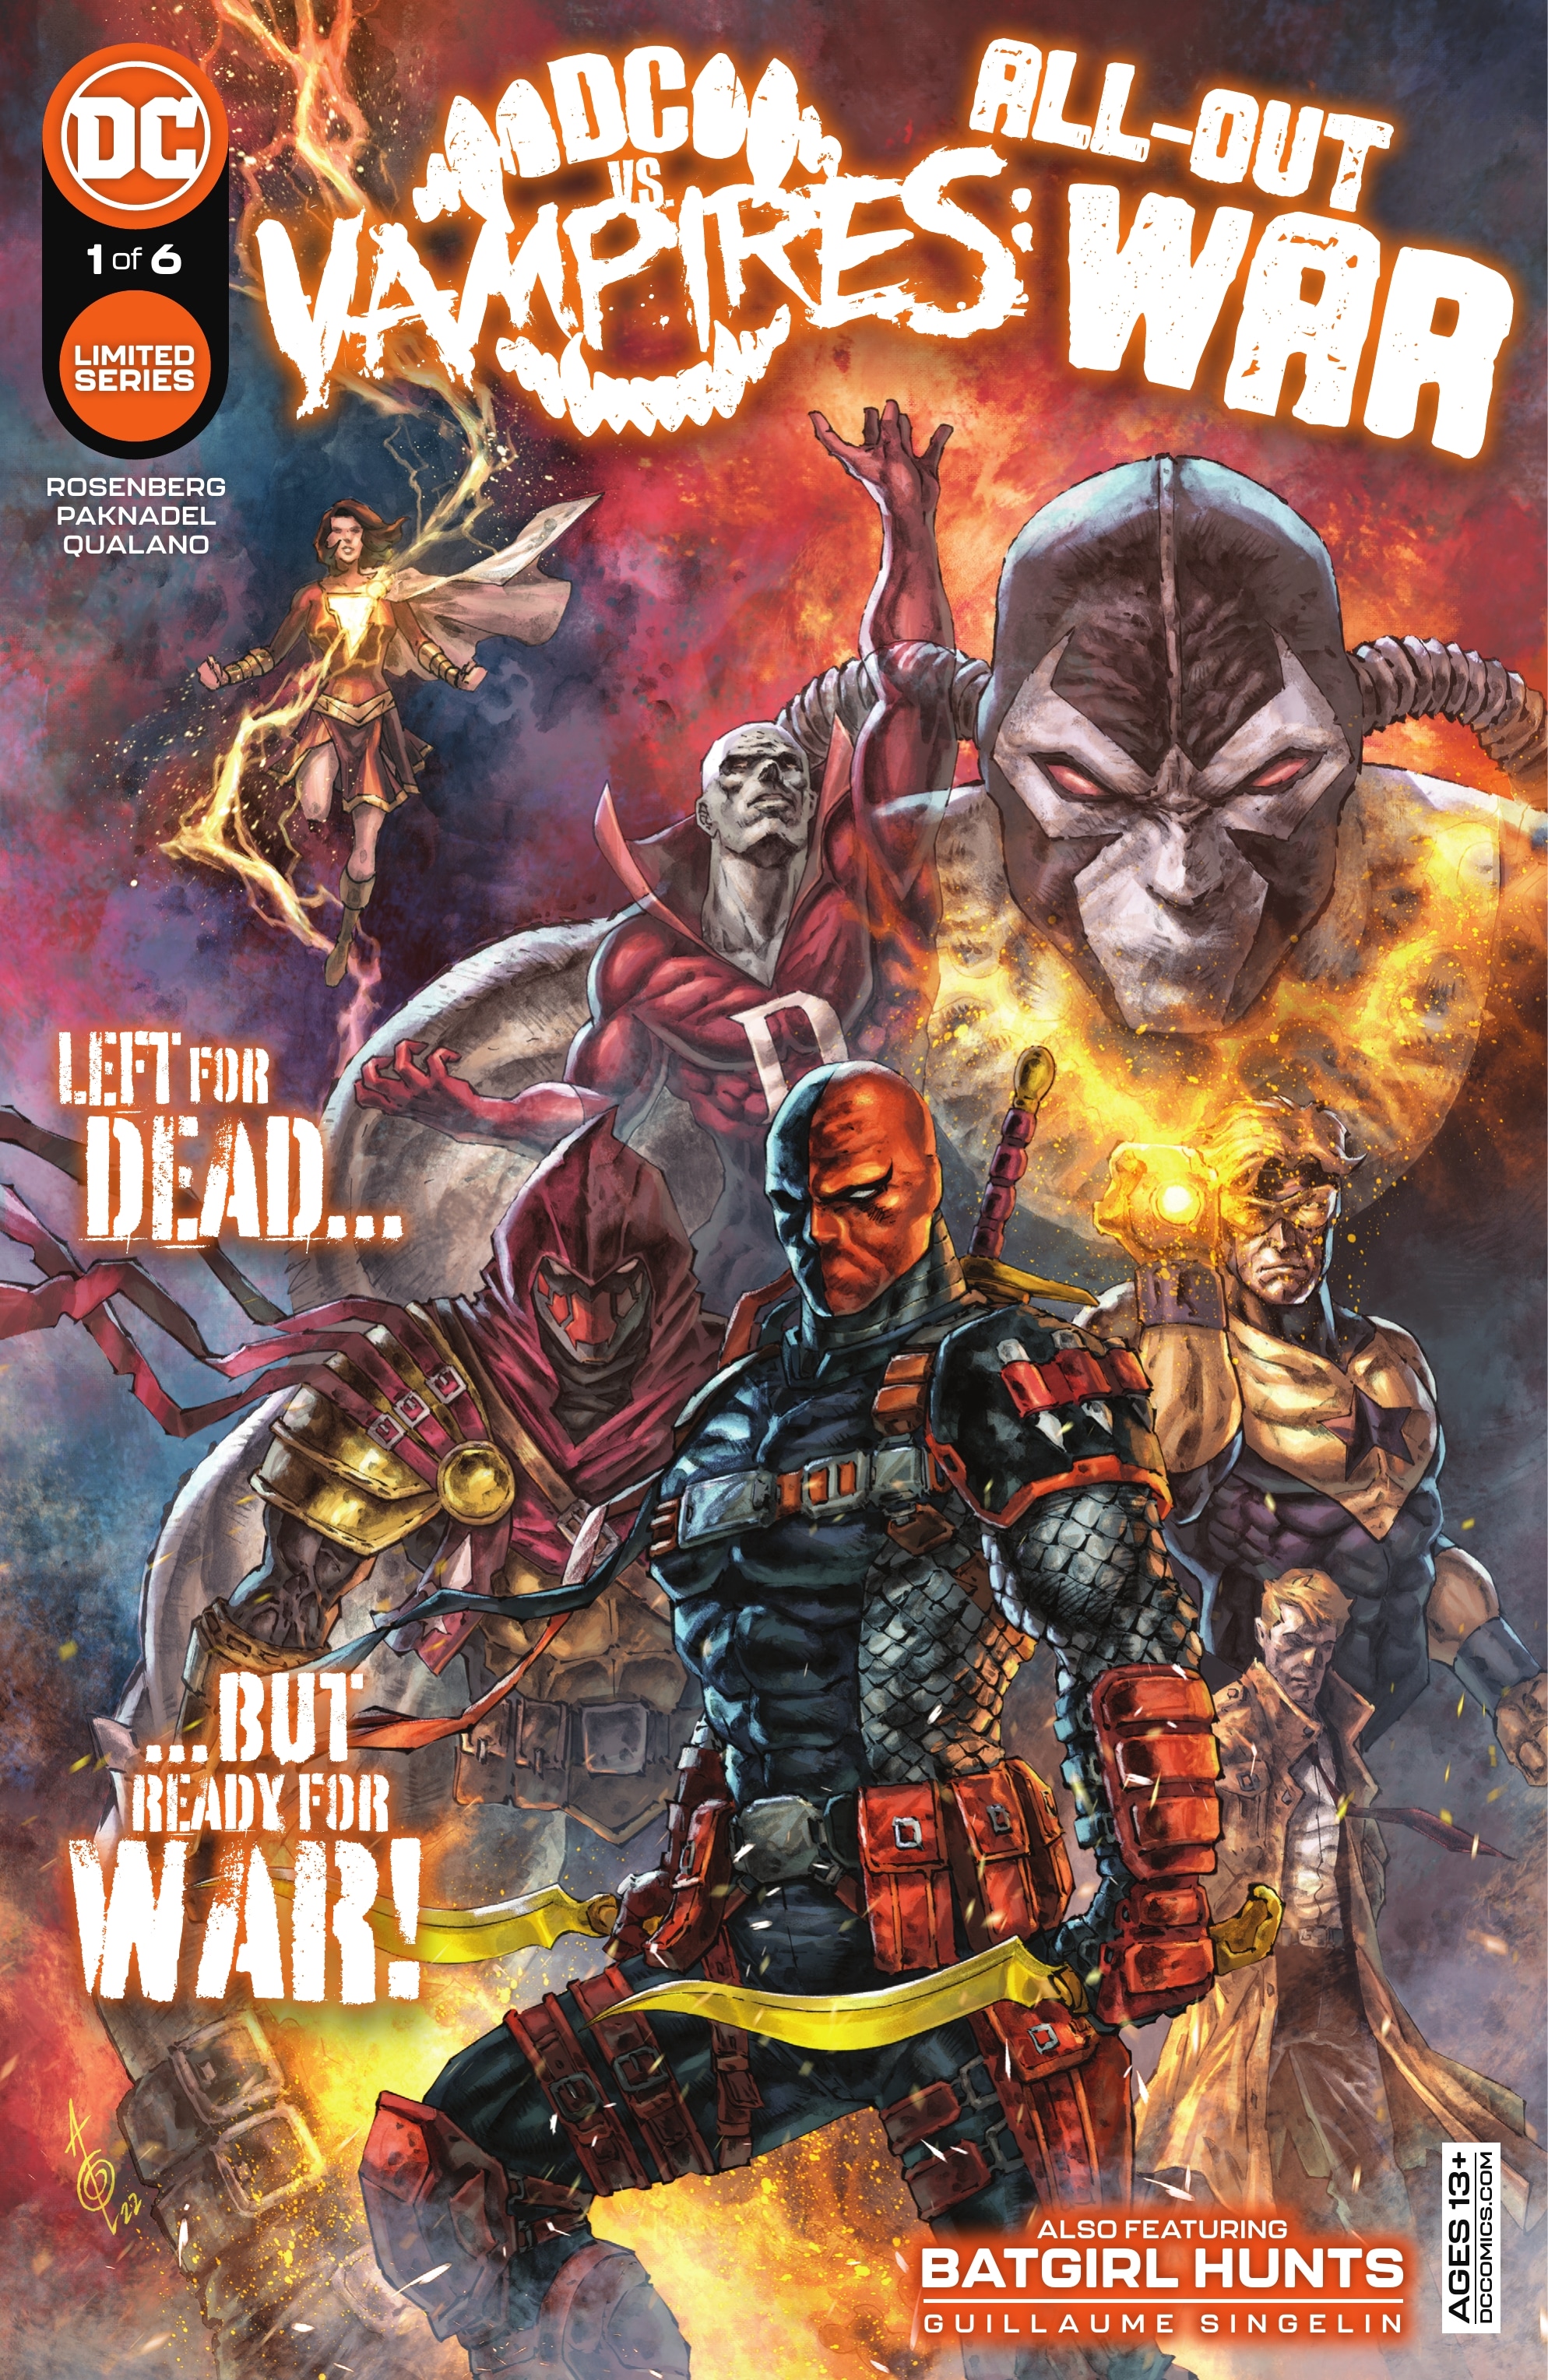 Read online DC vs. Vampires: All-Out War comic -  Issue #1 - 1